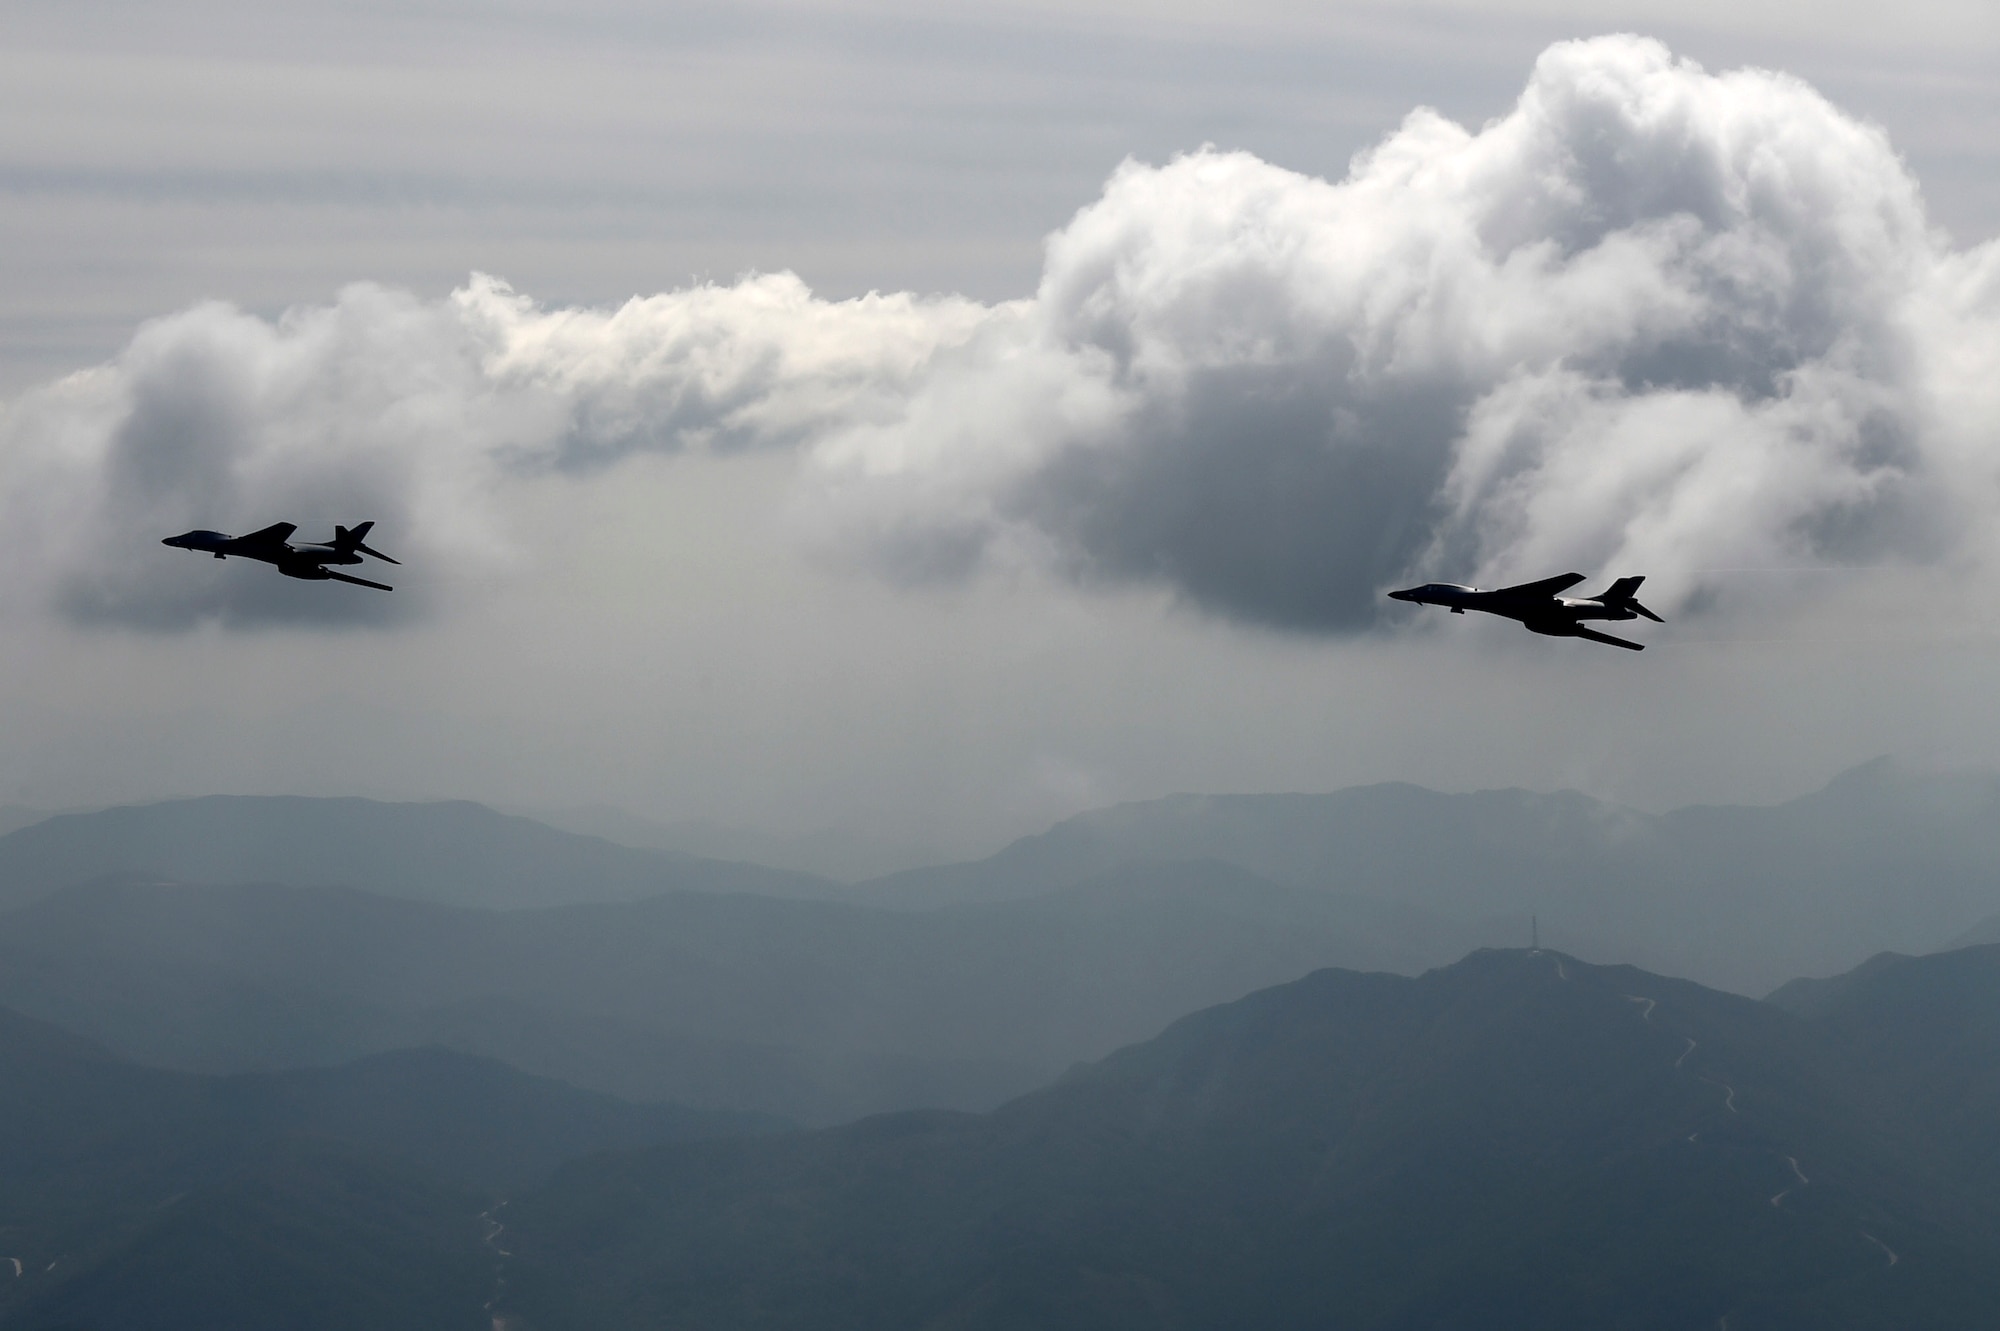 Two U.S. Air Force B-1B Lancers deployed to Andersen Air Base, Guam, fly over Republic of Korean skies Sept. 21, 2016. The flight was the closest a B-1 has ever flown to the border between the ROK and North Korea. The B-1 is the backbone of the U.S. long-range bomber mission and is capable of carrying the largest payload of both guided and unguided weapons in the Air Force inventory. (Republic of Korea air force photo by Chief Master Sgt. Kim, Kyeong Ryul)